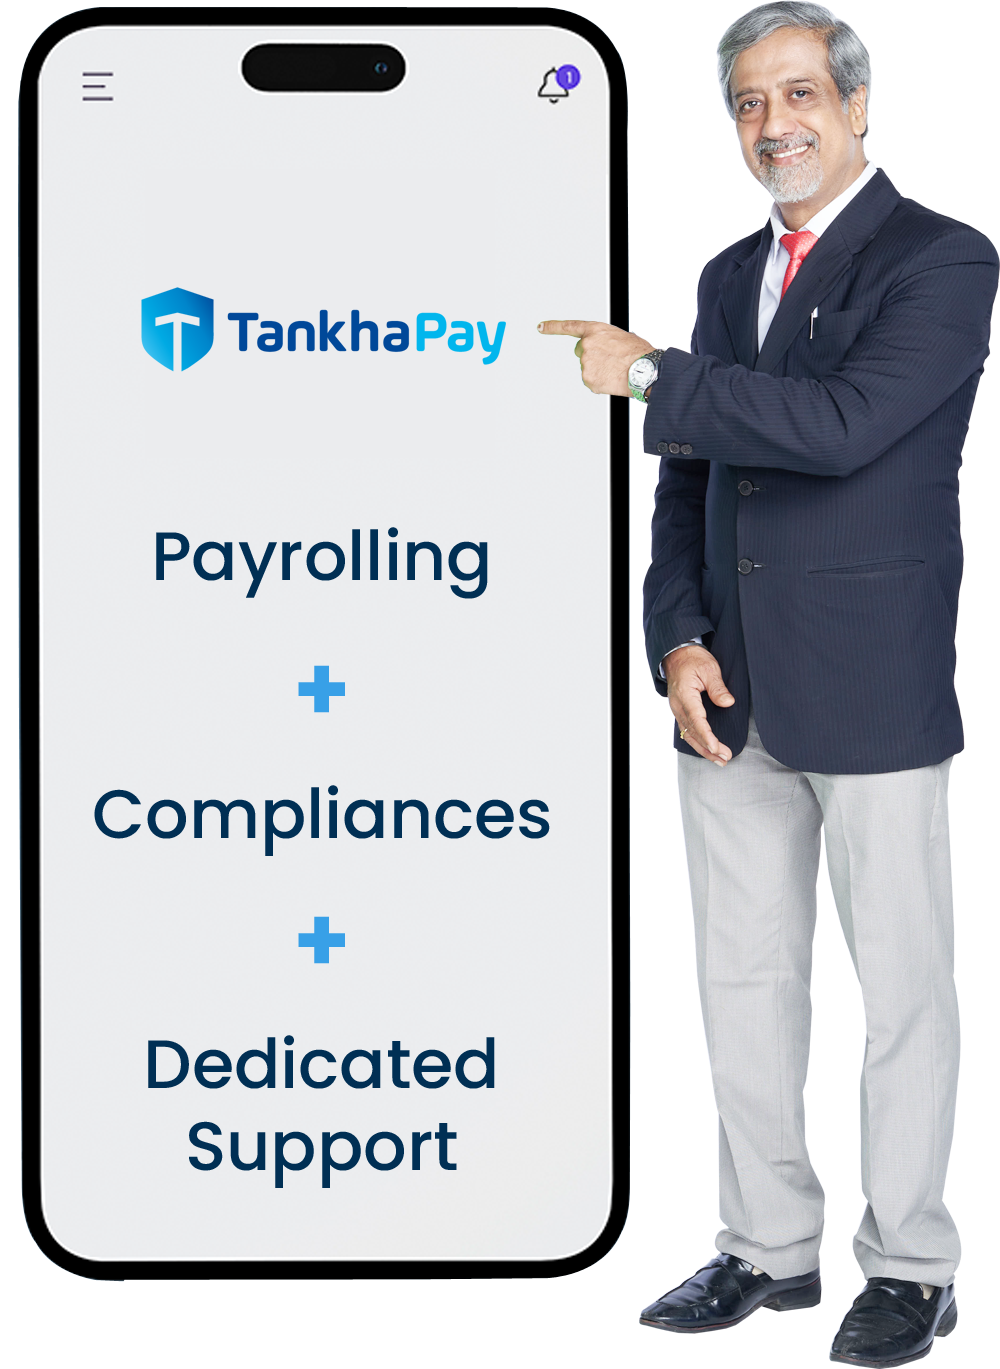 TankhaPay: Payroll Freedom in Your Pocket